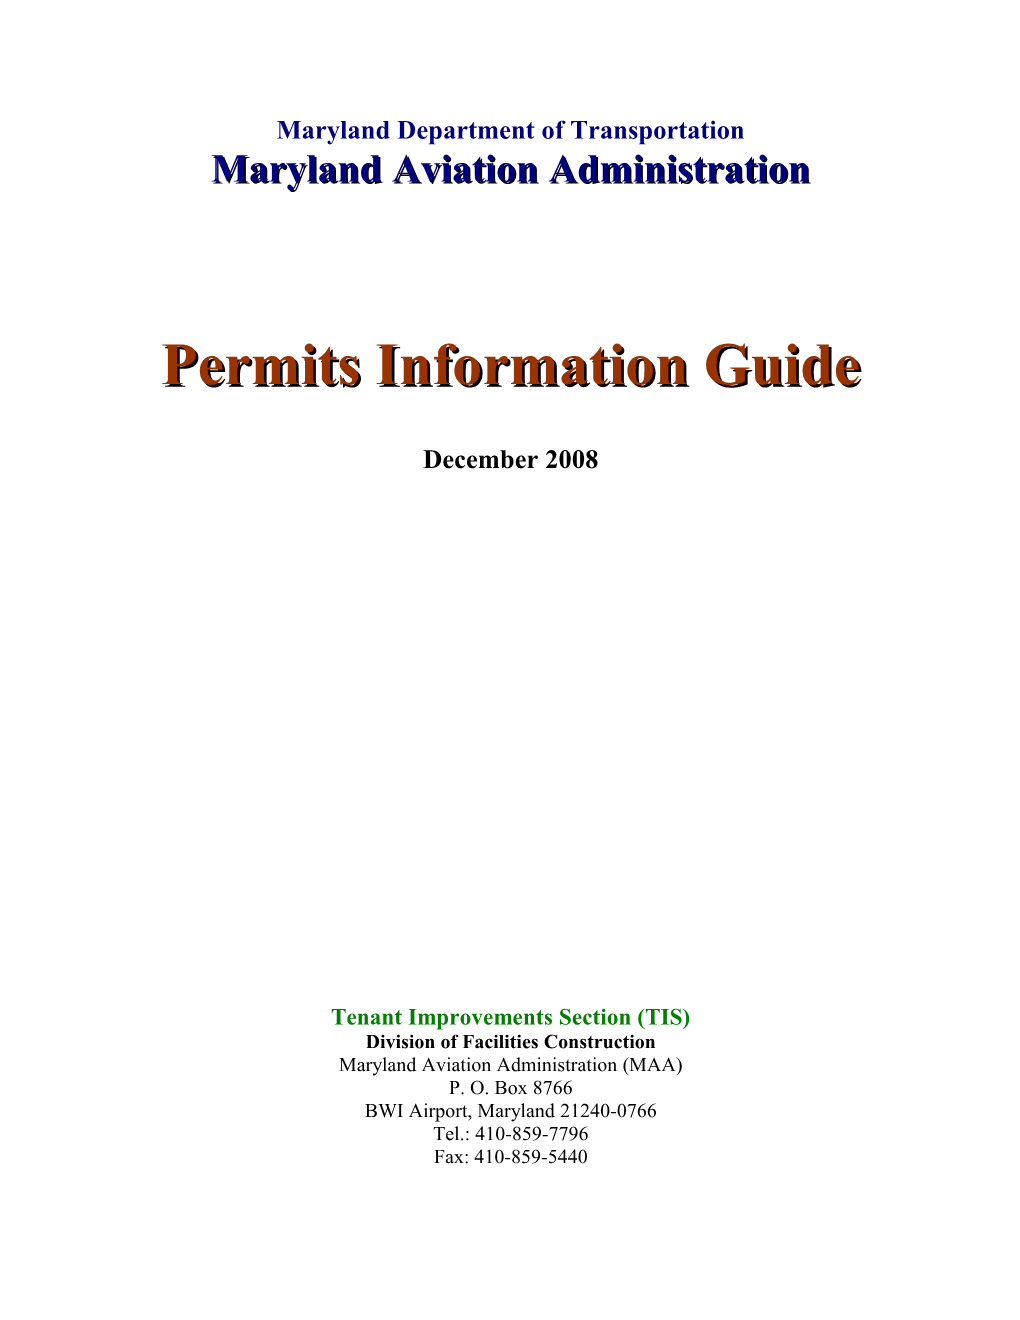 Maryland Aviation Administrationpermit Information Guide